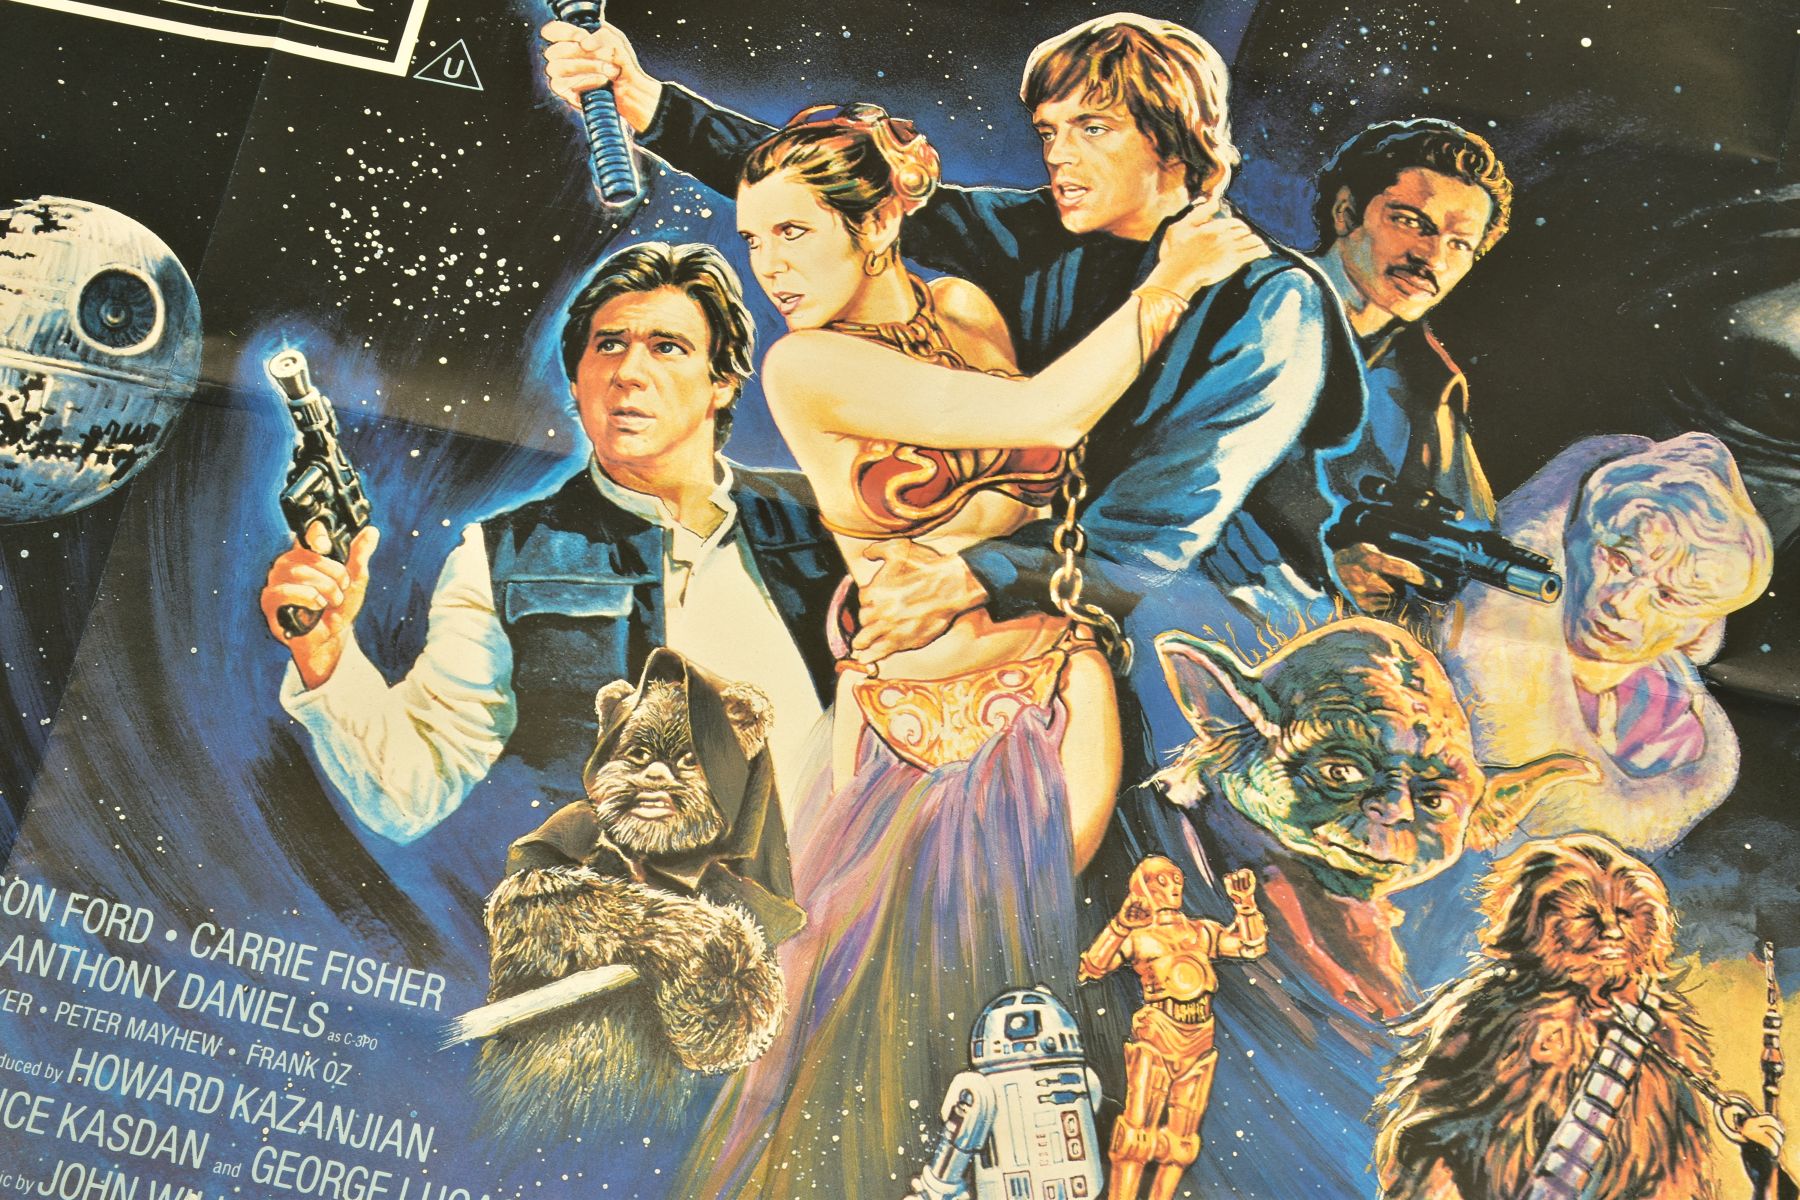 STAR WARS THE RETURN OF THE JEDI 1983, British quad film poster, artwork by printed by Lonsdale & - Image 6 of 10